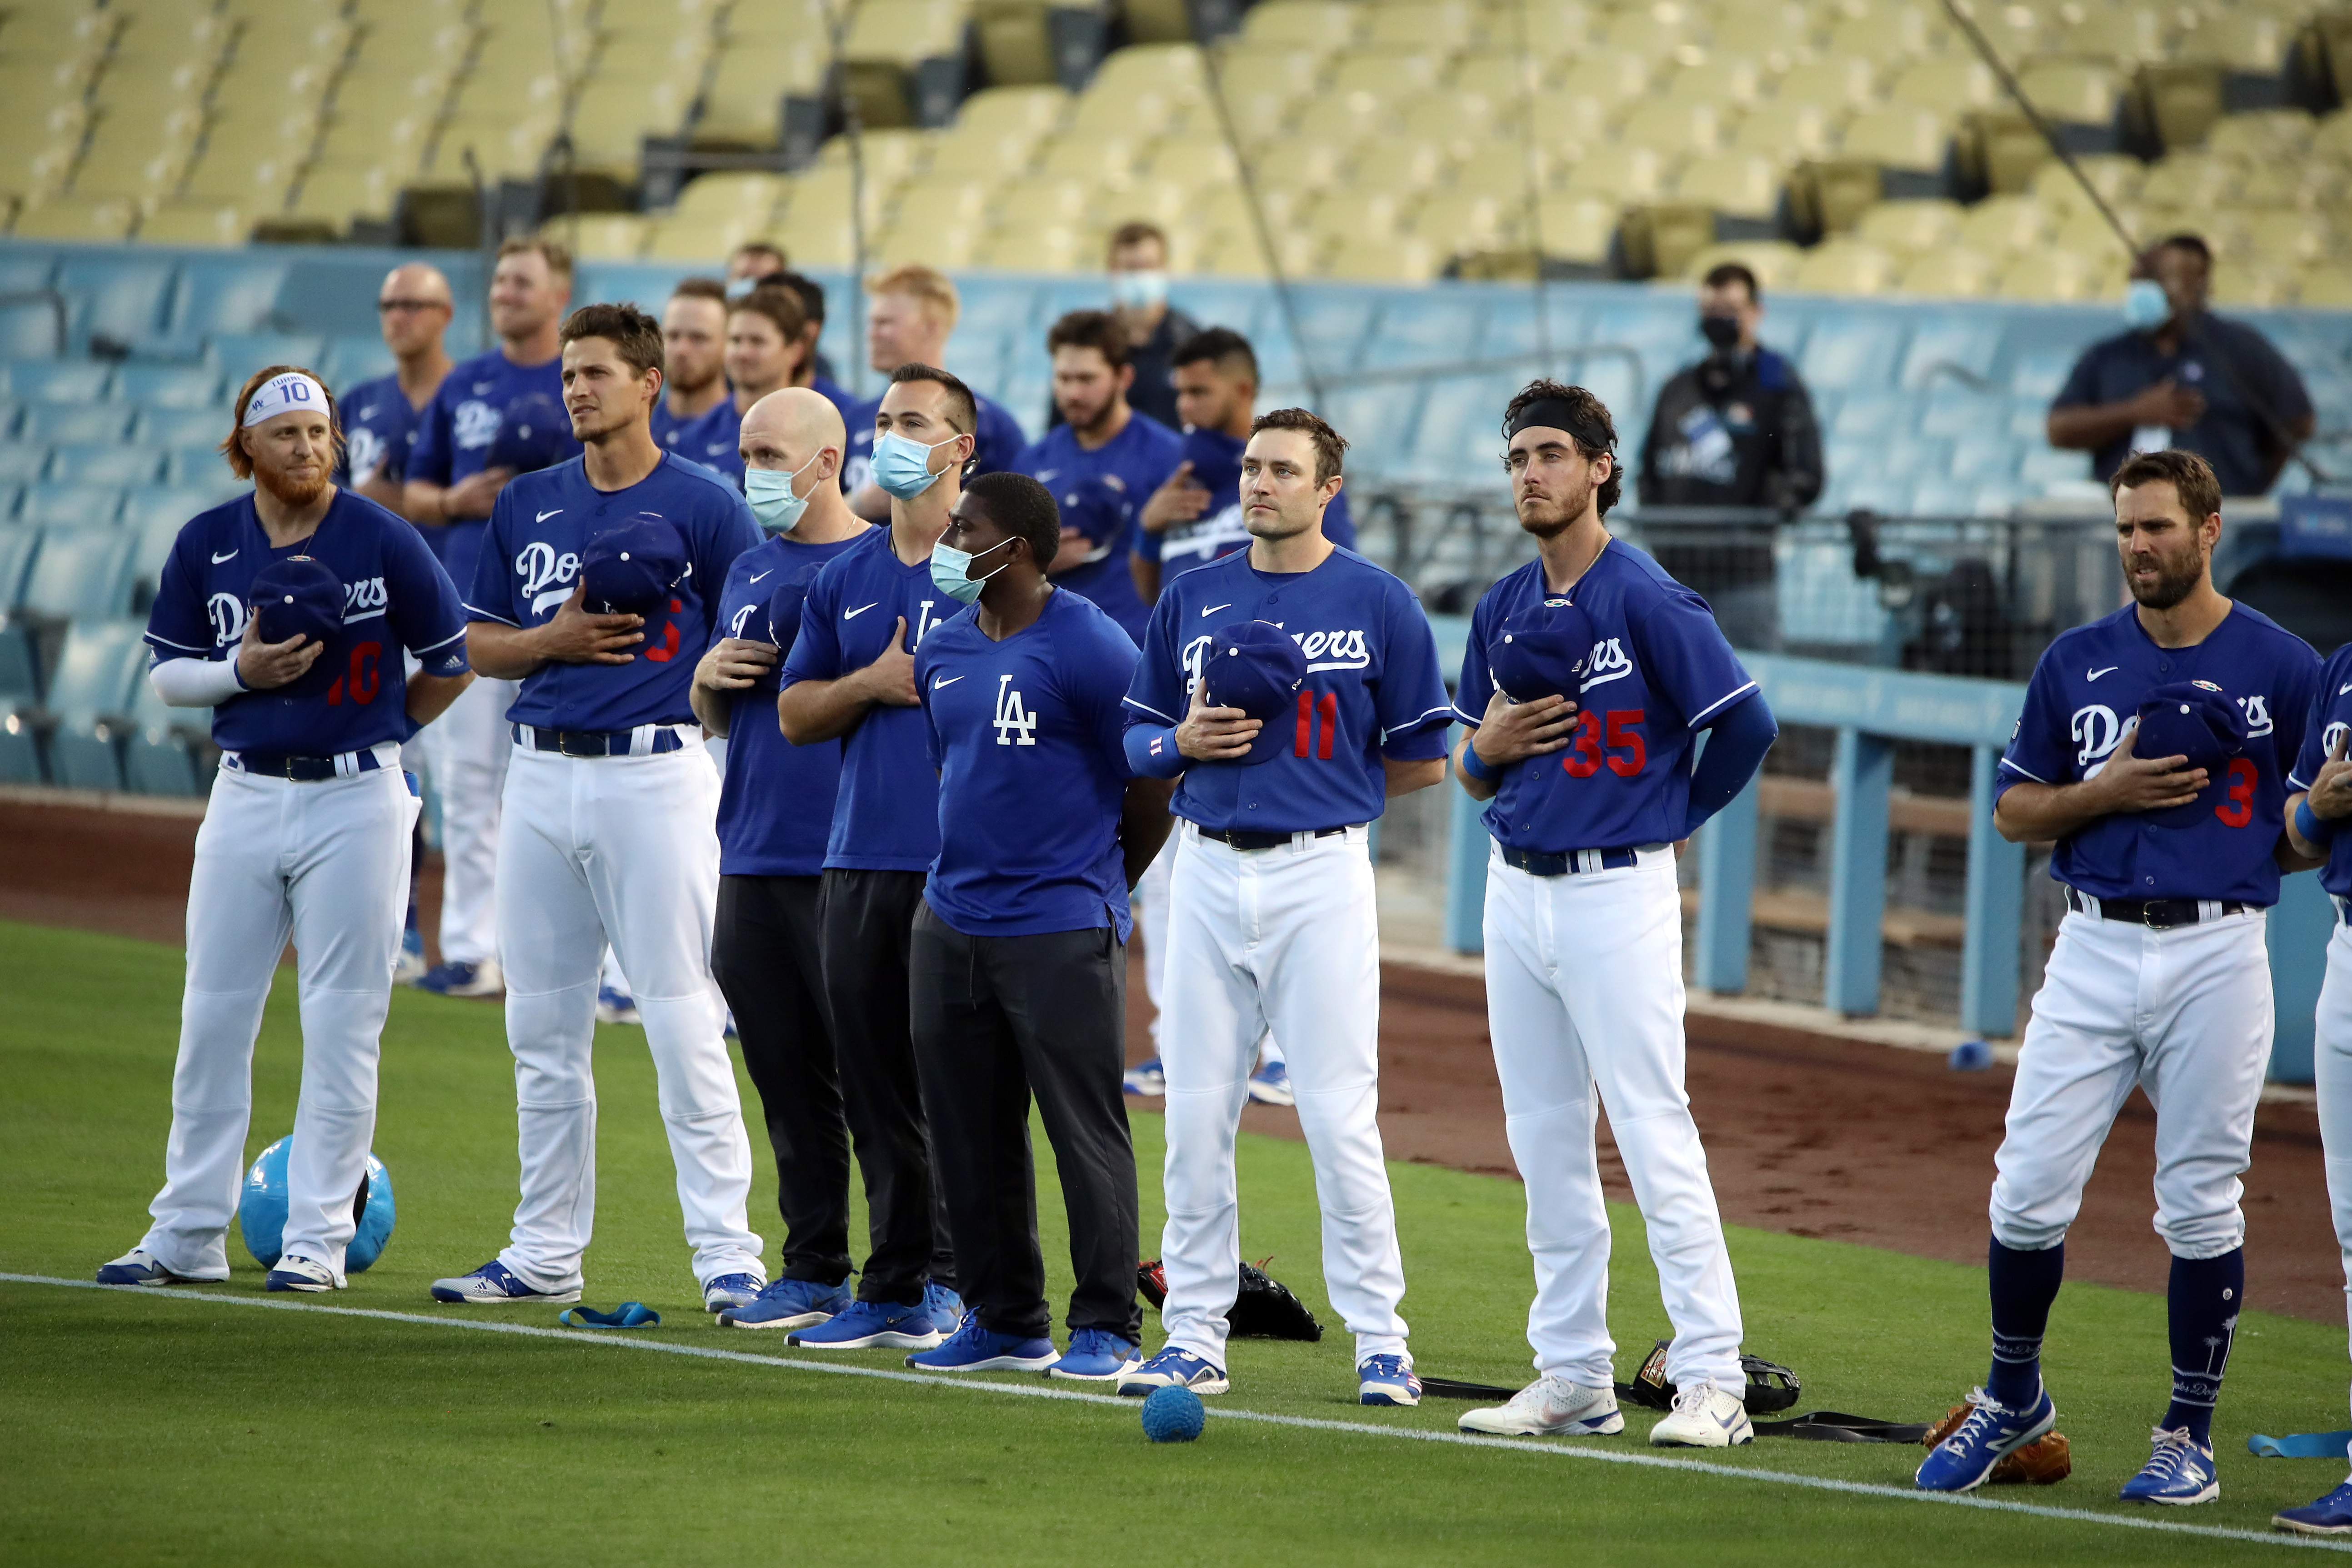 Through The Eyes Of A Winner: The 1988 L.A. Dodgers 